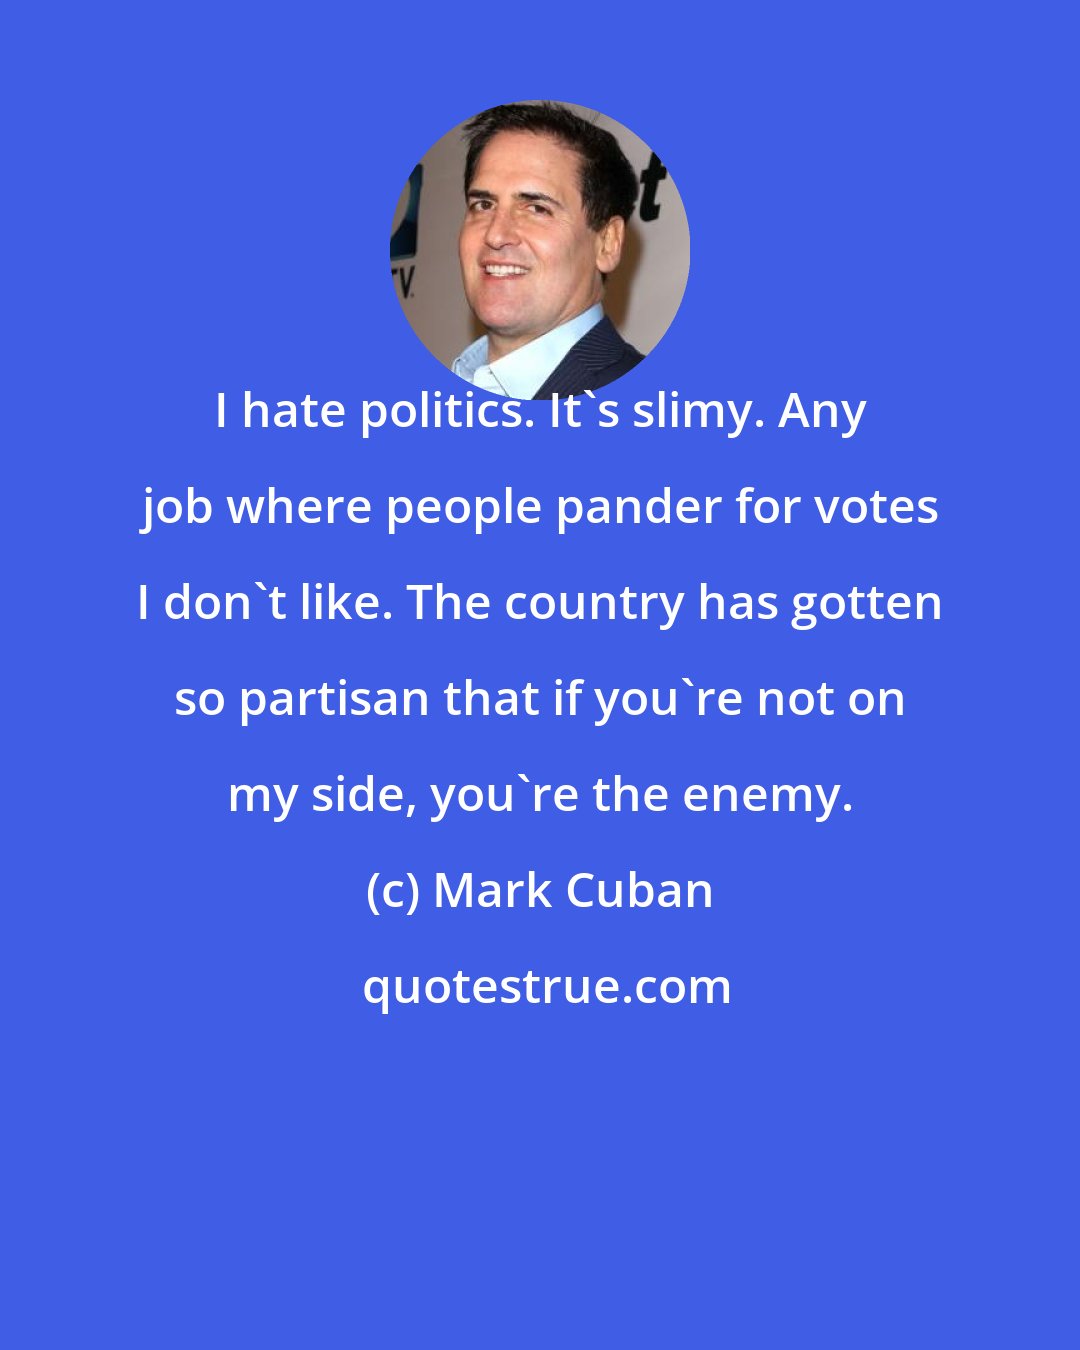 Mark Cuban: I hate politics. It's slimy. Any job where people pander for votes I don't like. The country has gotten so partisan that if you're not on my side, you're the enemy.